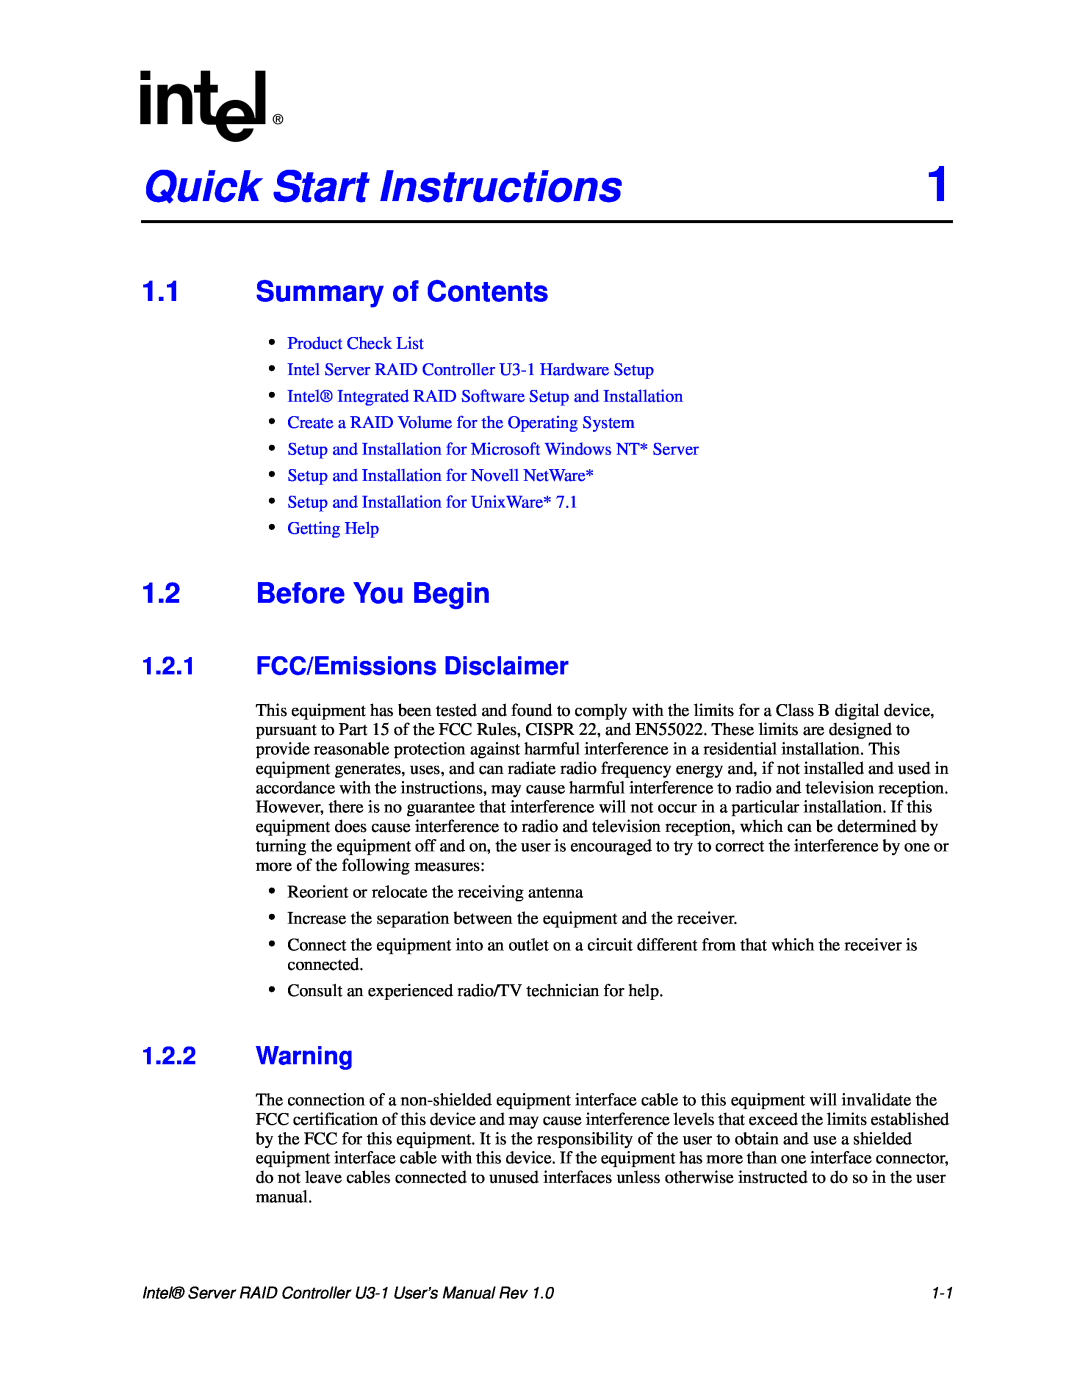 Intel SRCU31 user manual Quick Start Instructions, 1.1Summary of Contents, 1.2Before You Begin 